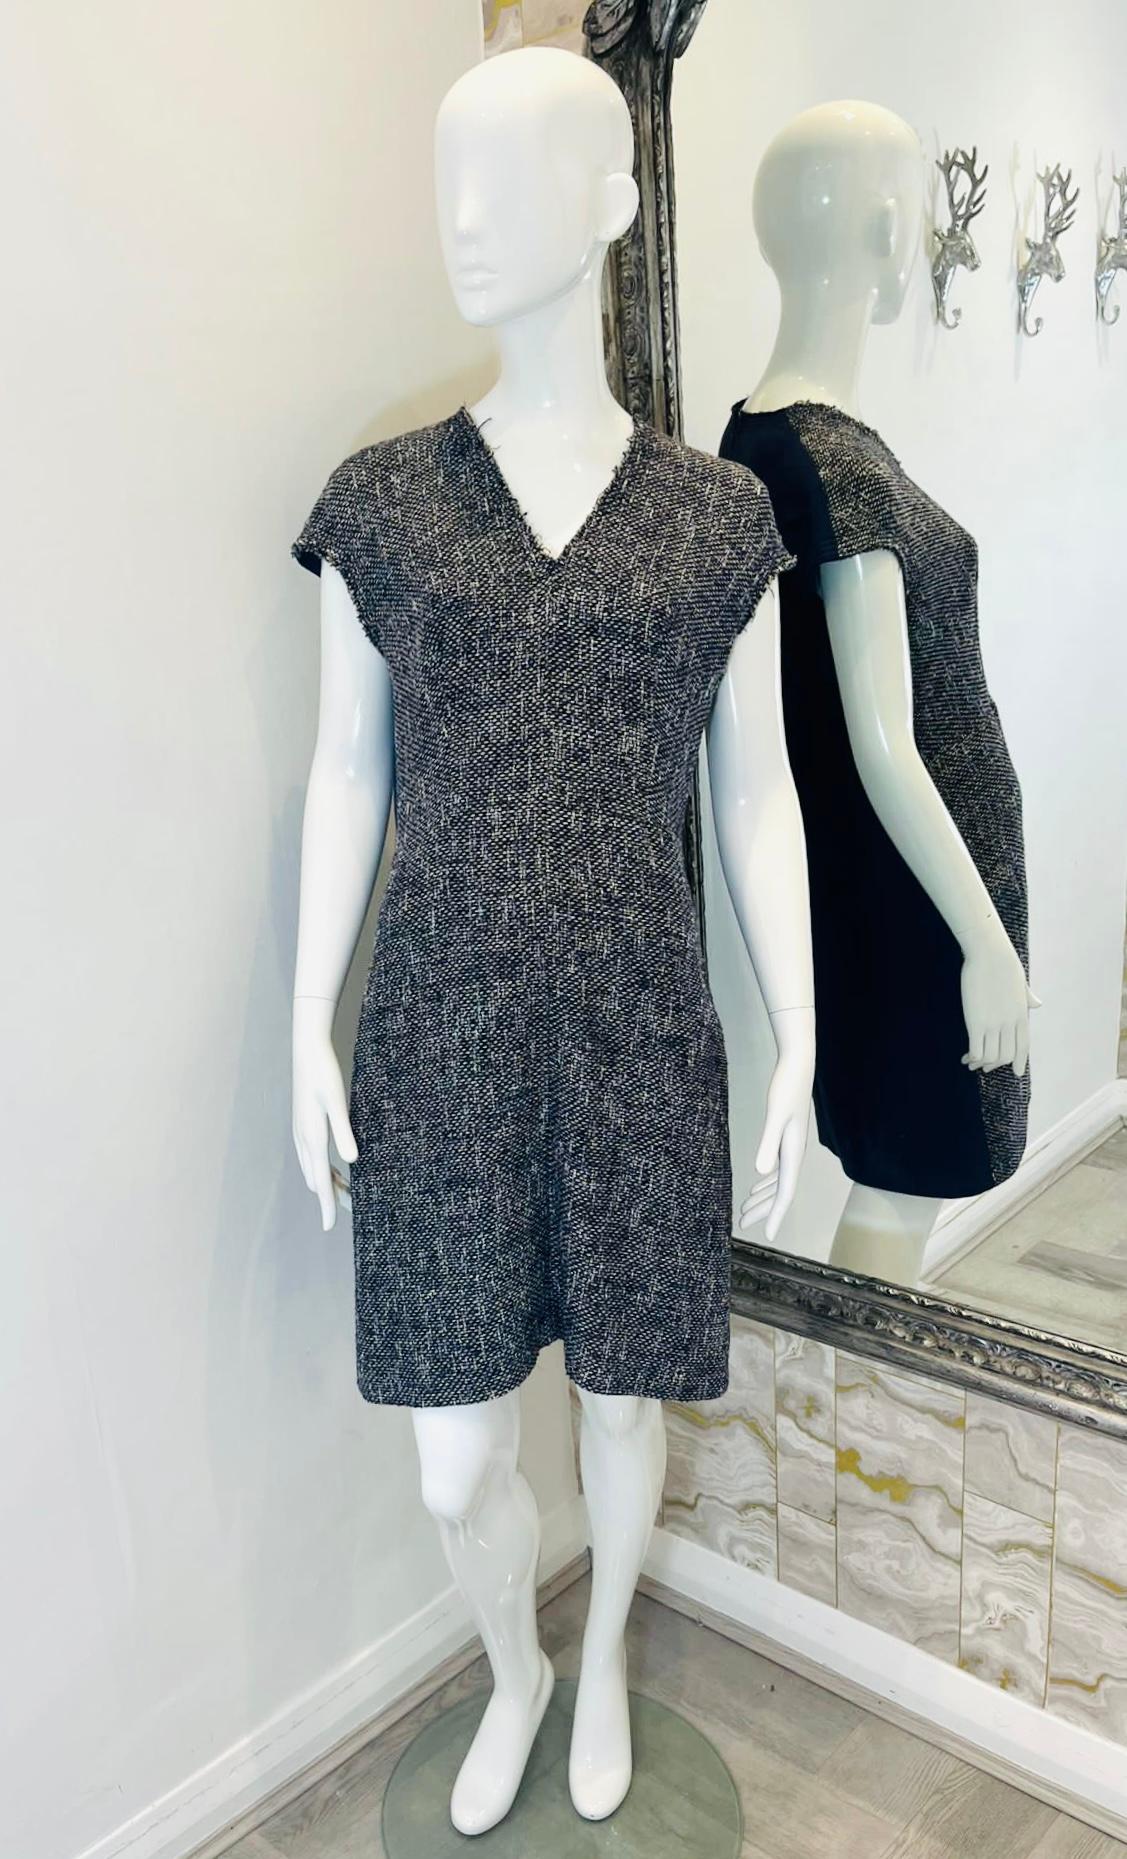 Etro Linen, Wool & Cotton Blend Dress

Woven, navy shift dress detailed with cap sleeves.

Featuring V-Neck, concealed zip fastening and smooth fabric to rear.

Size – 46IT

Condition – Very Good

Composition – 29% Cotton, 28% Linen, 17% Wool, 10%